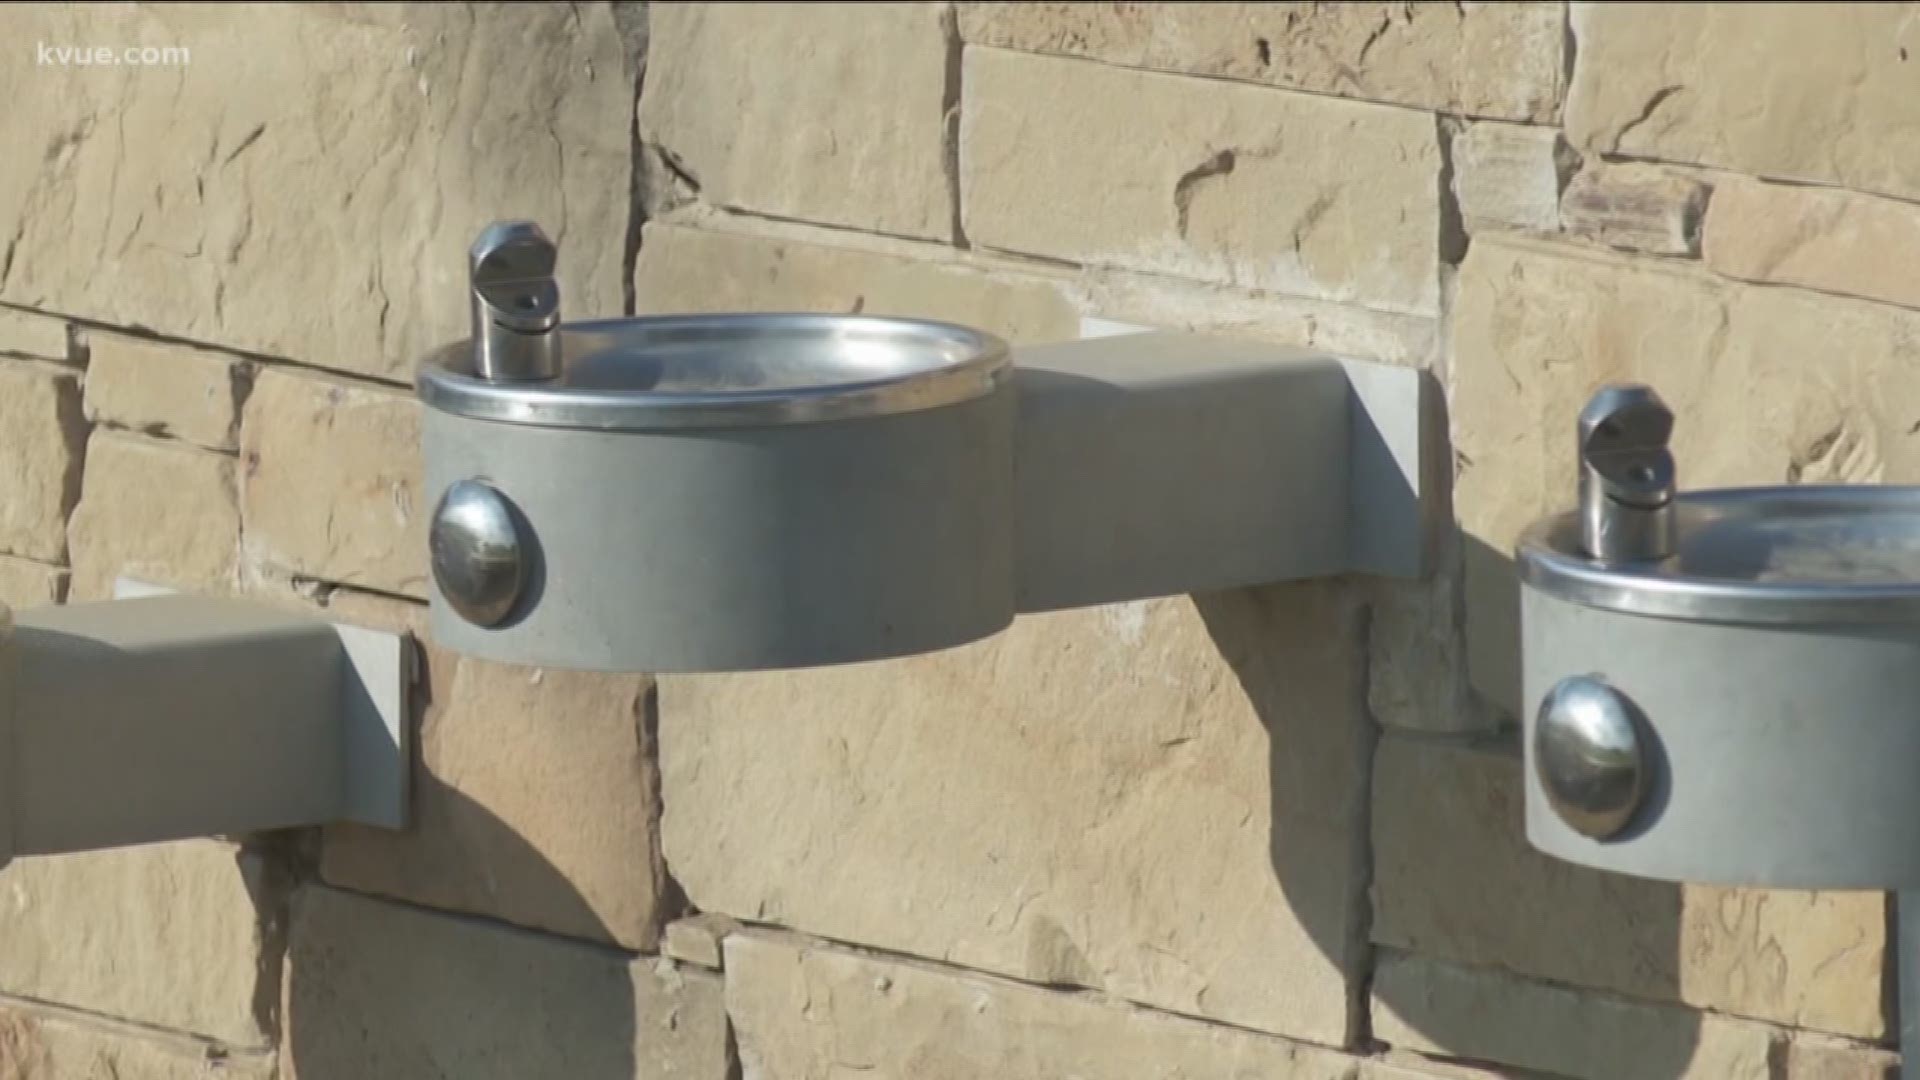 It could cost nearly $1 million to install 10 new drinking fountains throughout Downtown Austin.